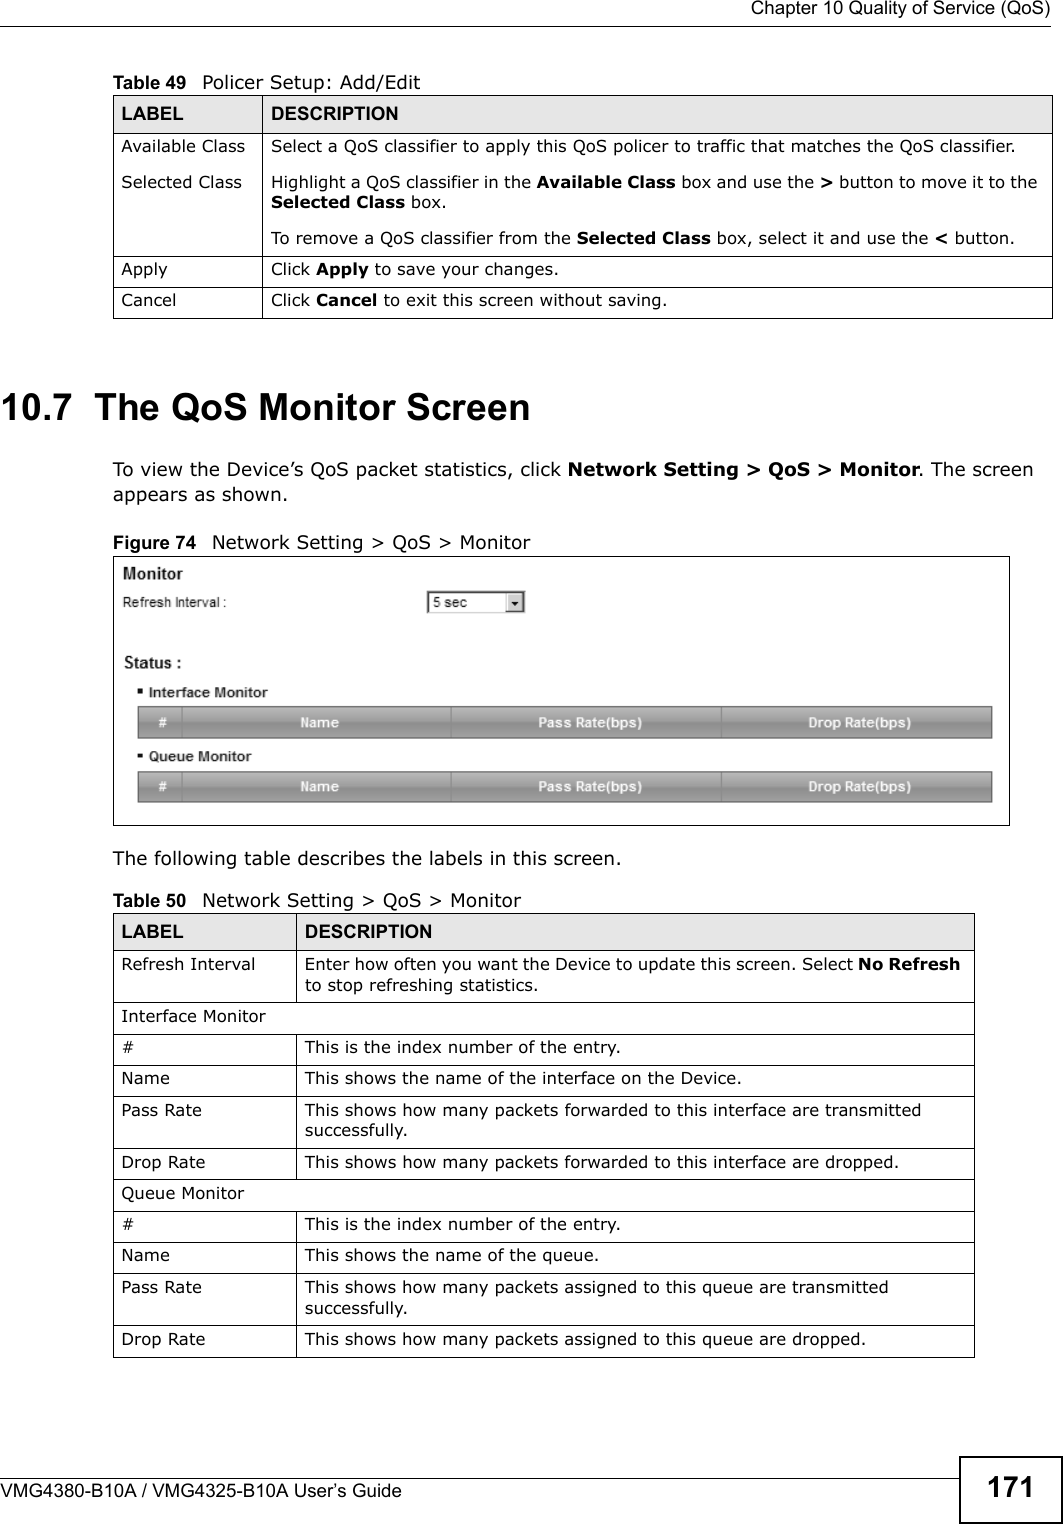  Chapter 10 Quality of Service (QoS)VMG4380-B10A / VMG4325-B10A User’s Guide 17110.7  The QoS Monitor Screen To view the Device’s QoS packet statistics, click Network Setting &gt; QoS &gt; Monitor. The screen appears as shown.Figure 74   Network Setting &gt; QoS &gt; Monitor The following table describes the labels in this screen.  Available ClassSelected Class Select a QoS classifier to apply this QoS policer to traffic that matches the QoS classifier.Highlight a QoS classifier in the Available Class box and use the &gt; button to move it to theSelected Class box.To remove a QoS classifier from the Selected Class box, select it and use the &lt; button.Apply Click Apply to save your changes.Cancel Click Cancel to exit this screen without saving.Table 49   Policer Setup: Add/EditLABEL DESCRIPTIONTable 50   Network Setting &gt; QoS &gt; MonitorLABEL DESCRIPTIONRefresh Interval Enter how often you want the Device to update this screen. Select No Refreshto stop refreshing statistics.Interface Monitor# This is the index number of the entry.Name This shows the name of the interface on the Device. Pass Rate This shows how many packets forwarded to this interface are transmitted successfully.Drop Rate This shows how many packets forwarded to this interface are dropped.Queue Monitor# This is the index number of the entry.Name This shows the name of the queue.Pass Rate This shows how many packets assigned to this queue are transmitted successfully.Drop Rate This shows how many packets assigned to this queue are dropped.